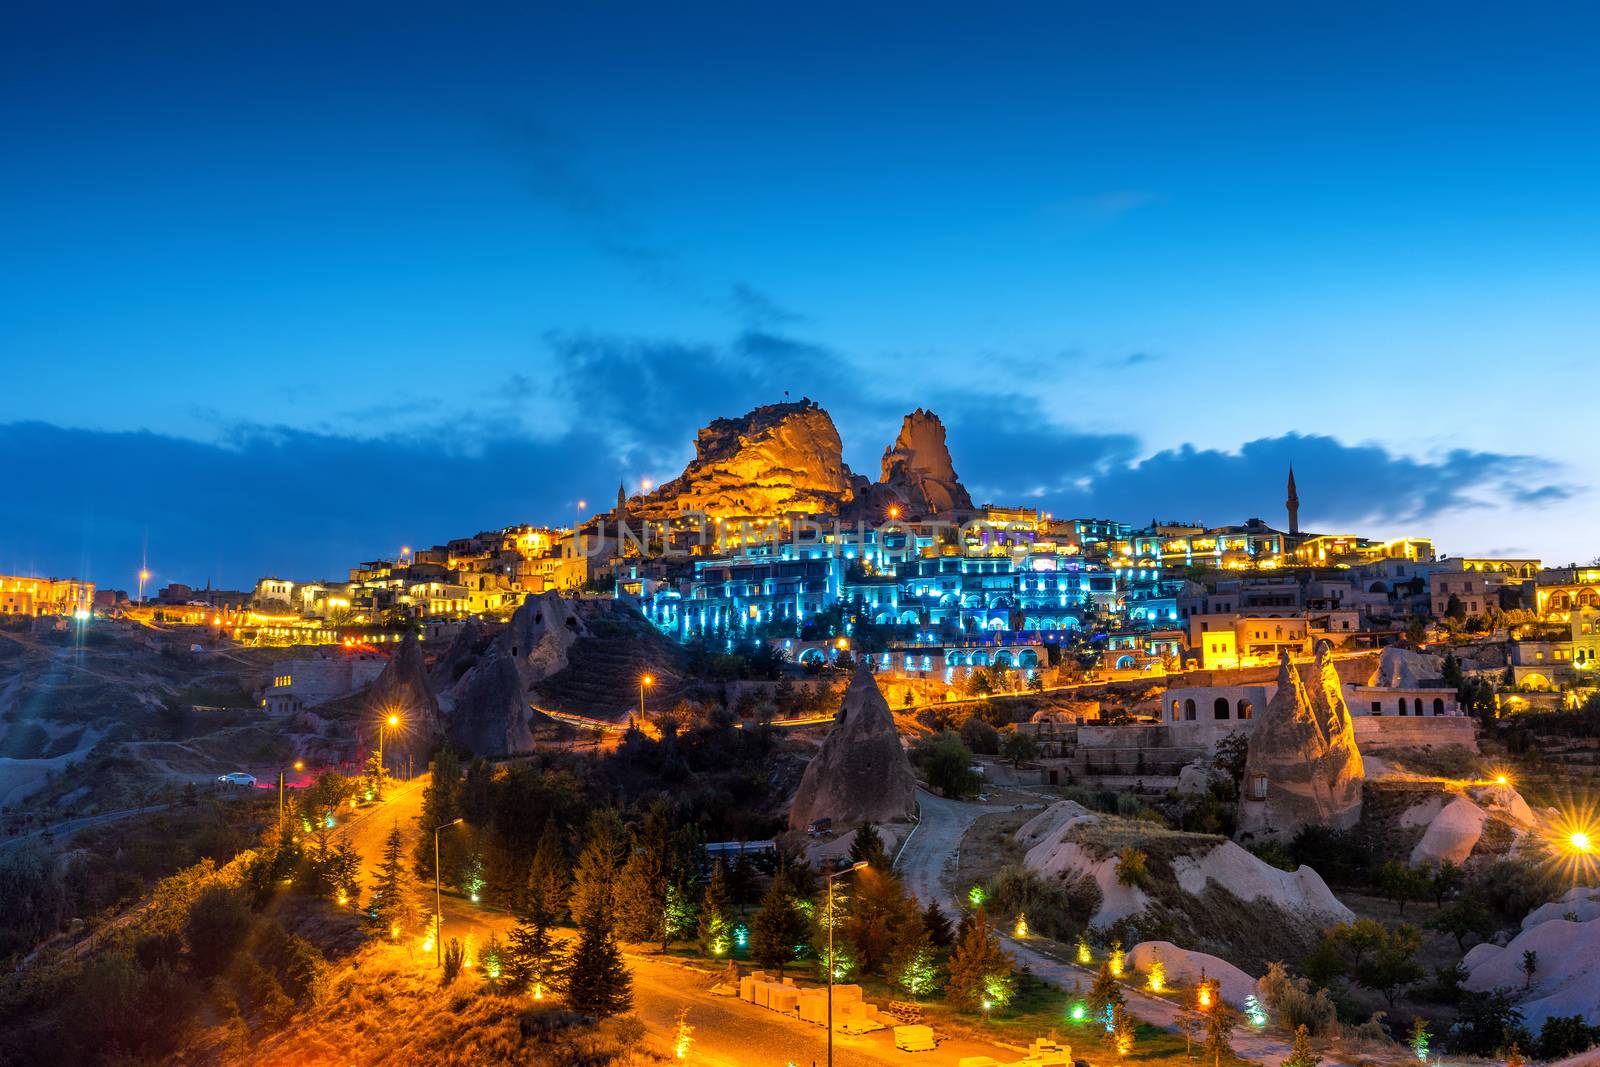 Uchisar Castle at night in Cappadocia, Turkey. by gutarphotoghaphy